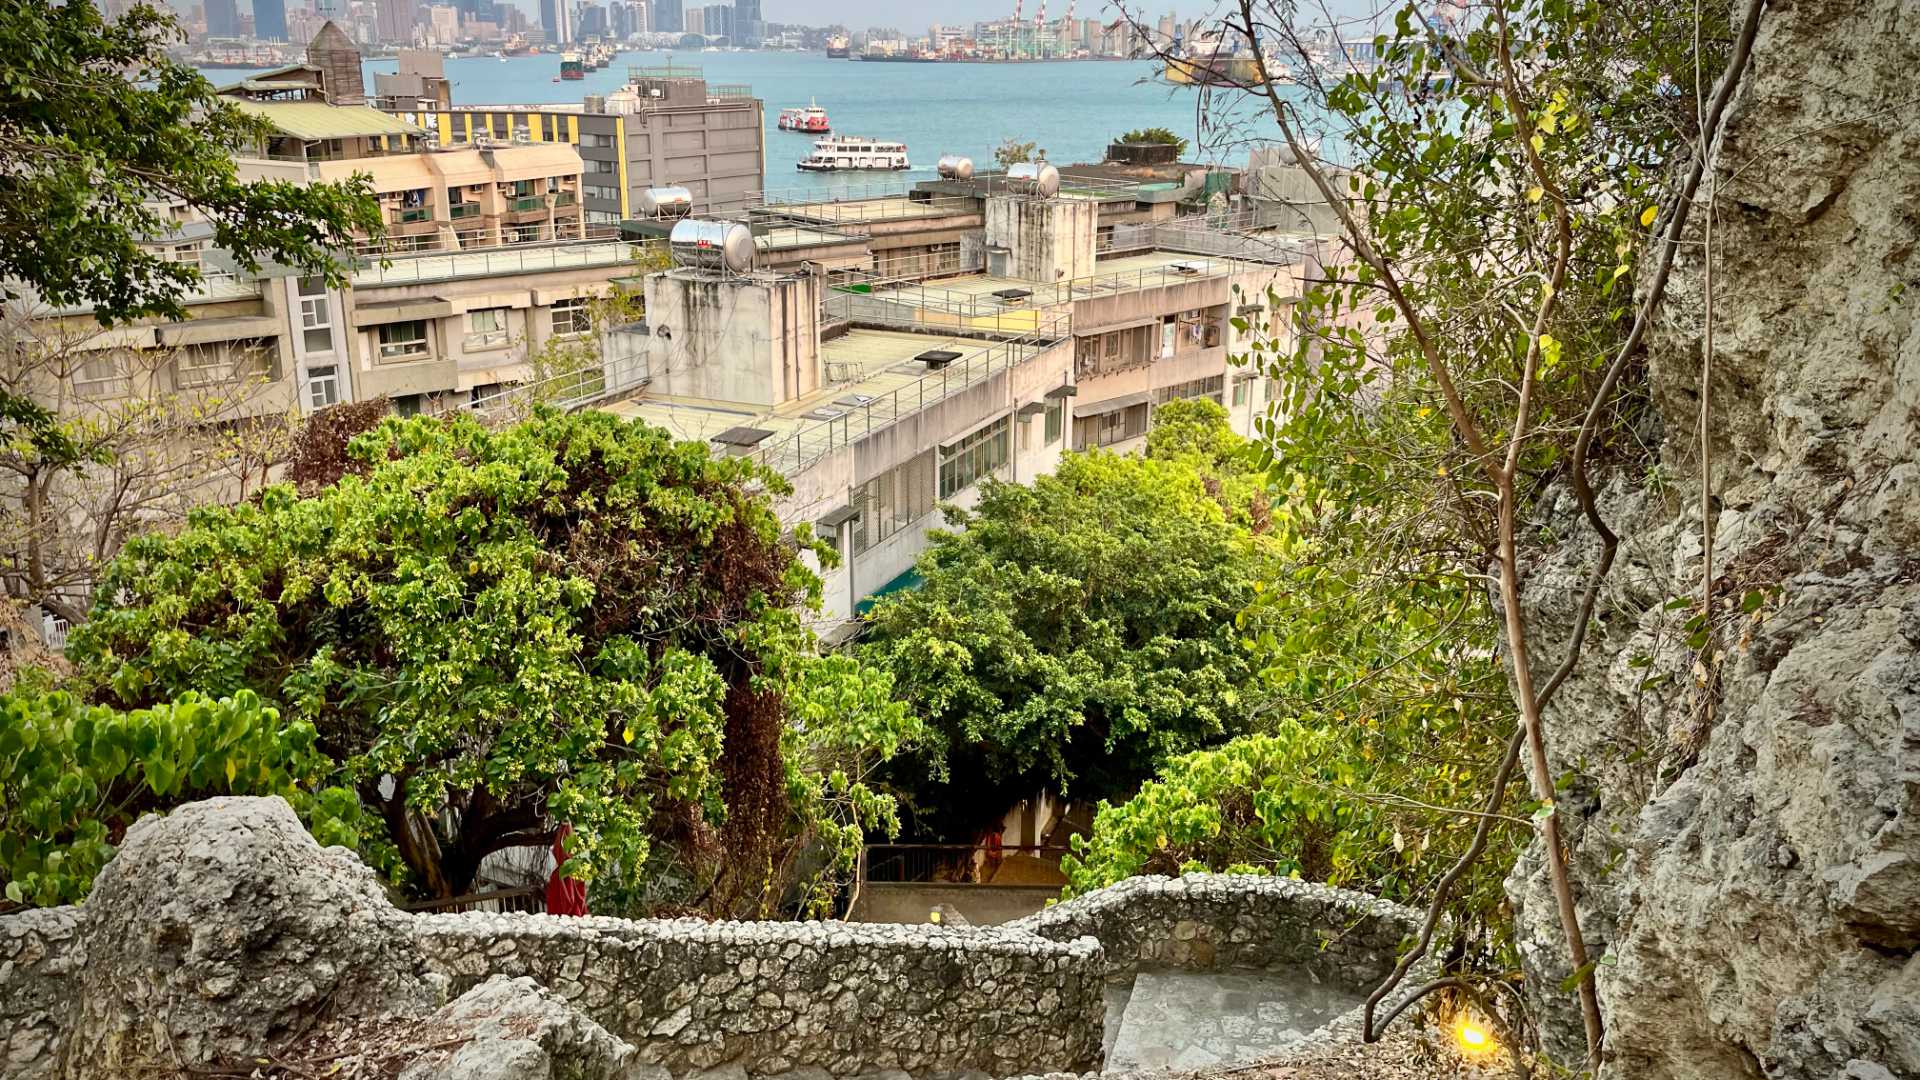 Looking downhill over the stone steps and apartments towards Kaohsiung Harbor. Two scooter ferries are visible in the middle of the harbor, and cranes and skyscrapers can be seen in the far distance.